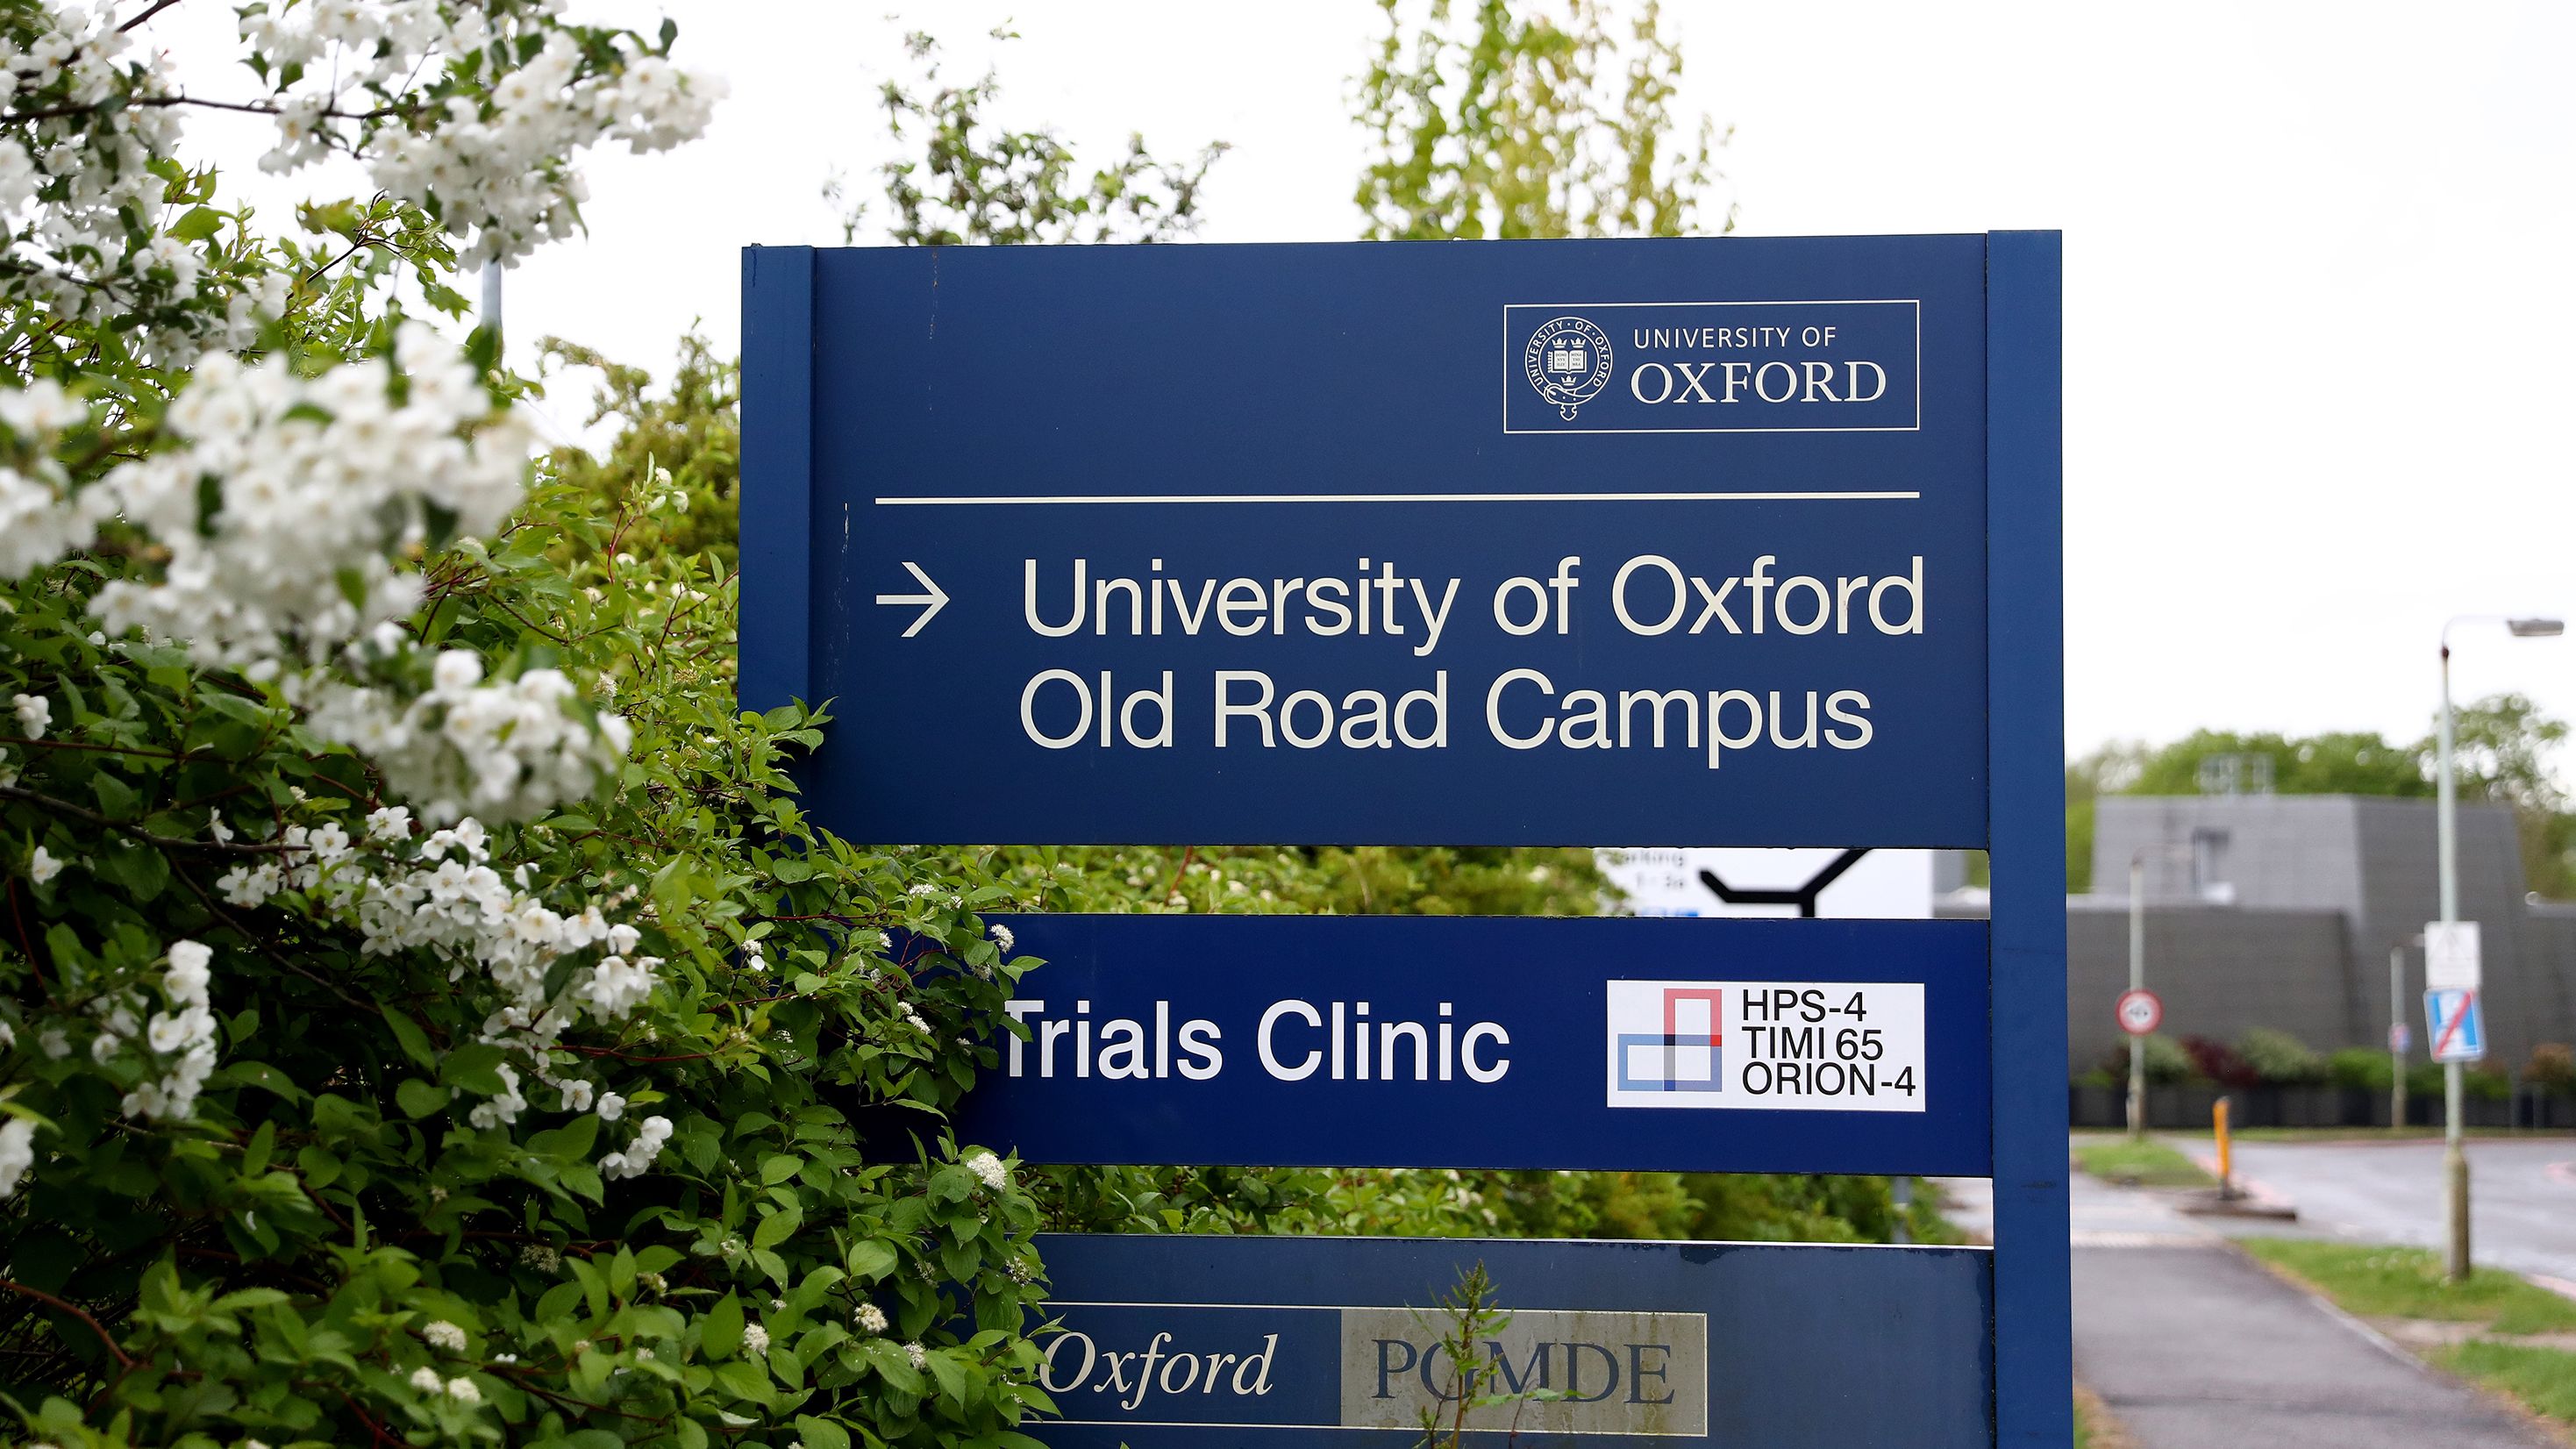 The University of Oxford Old Road Campus, where the first human trials of a coronavirus vaccine are taking place, on April 29.